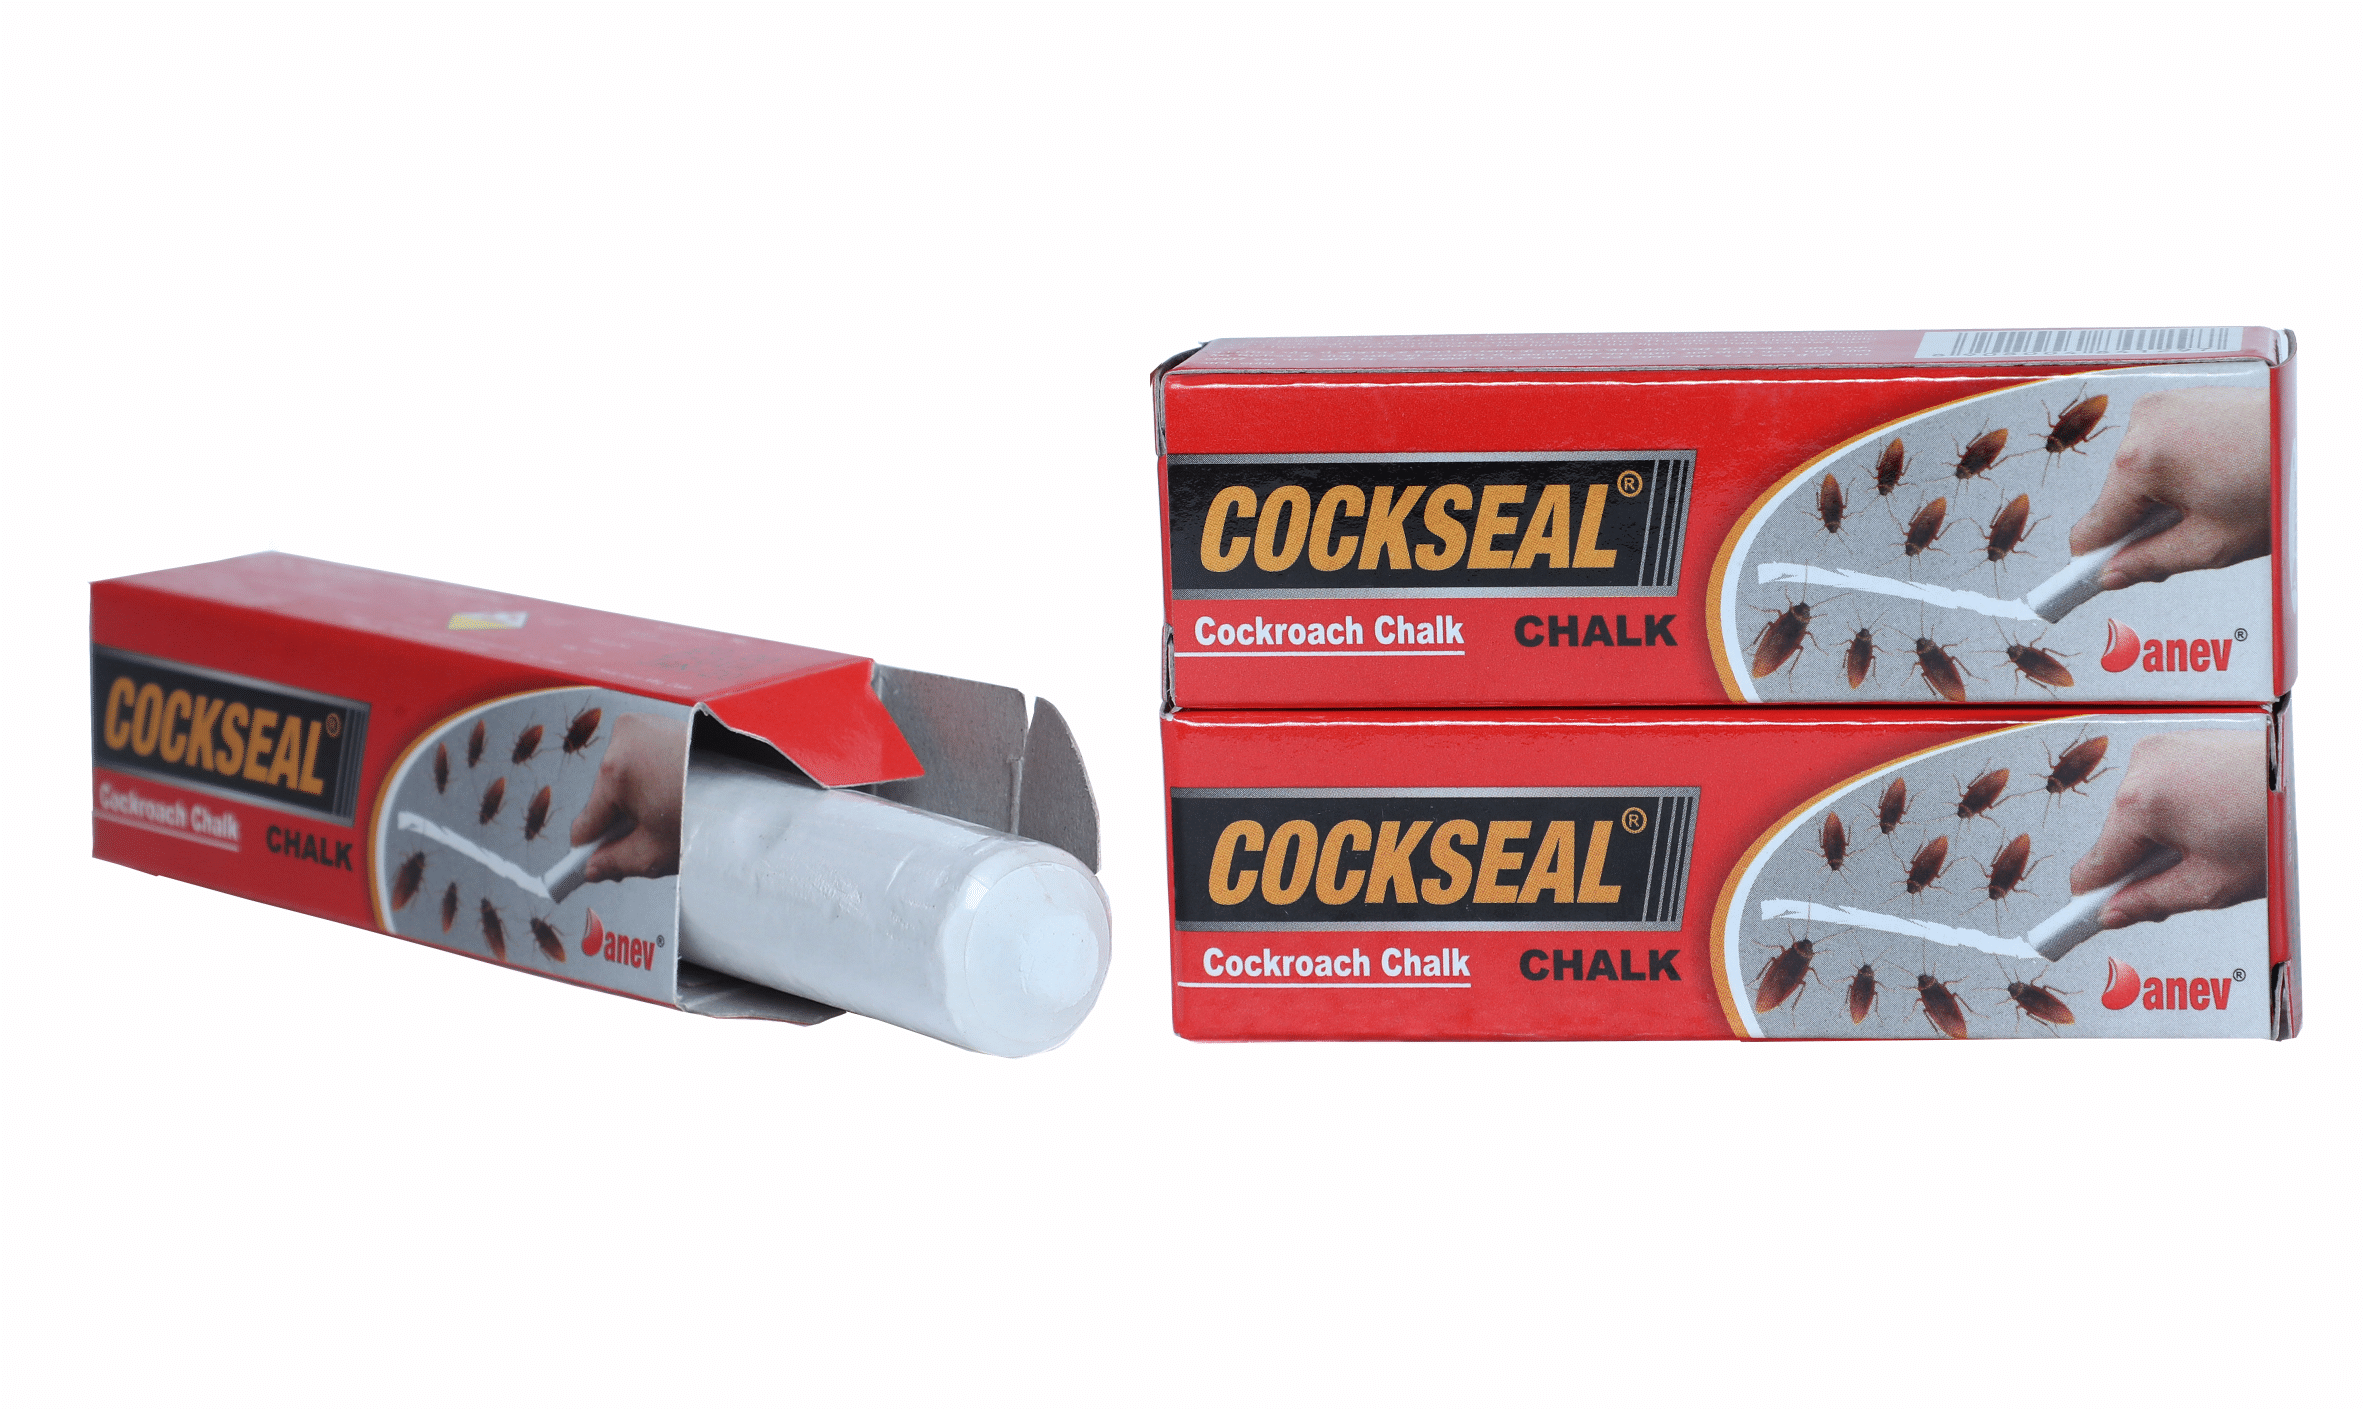 COCKSEAL COCROCH CHALK